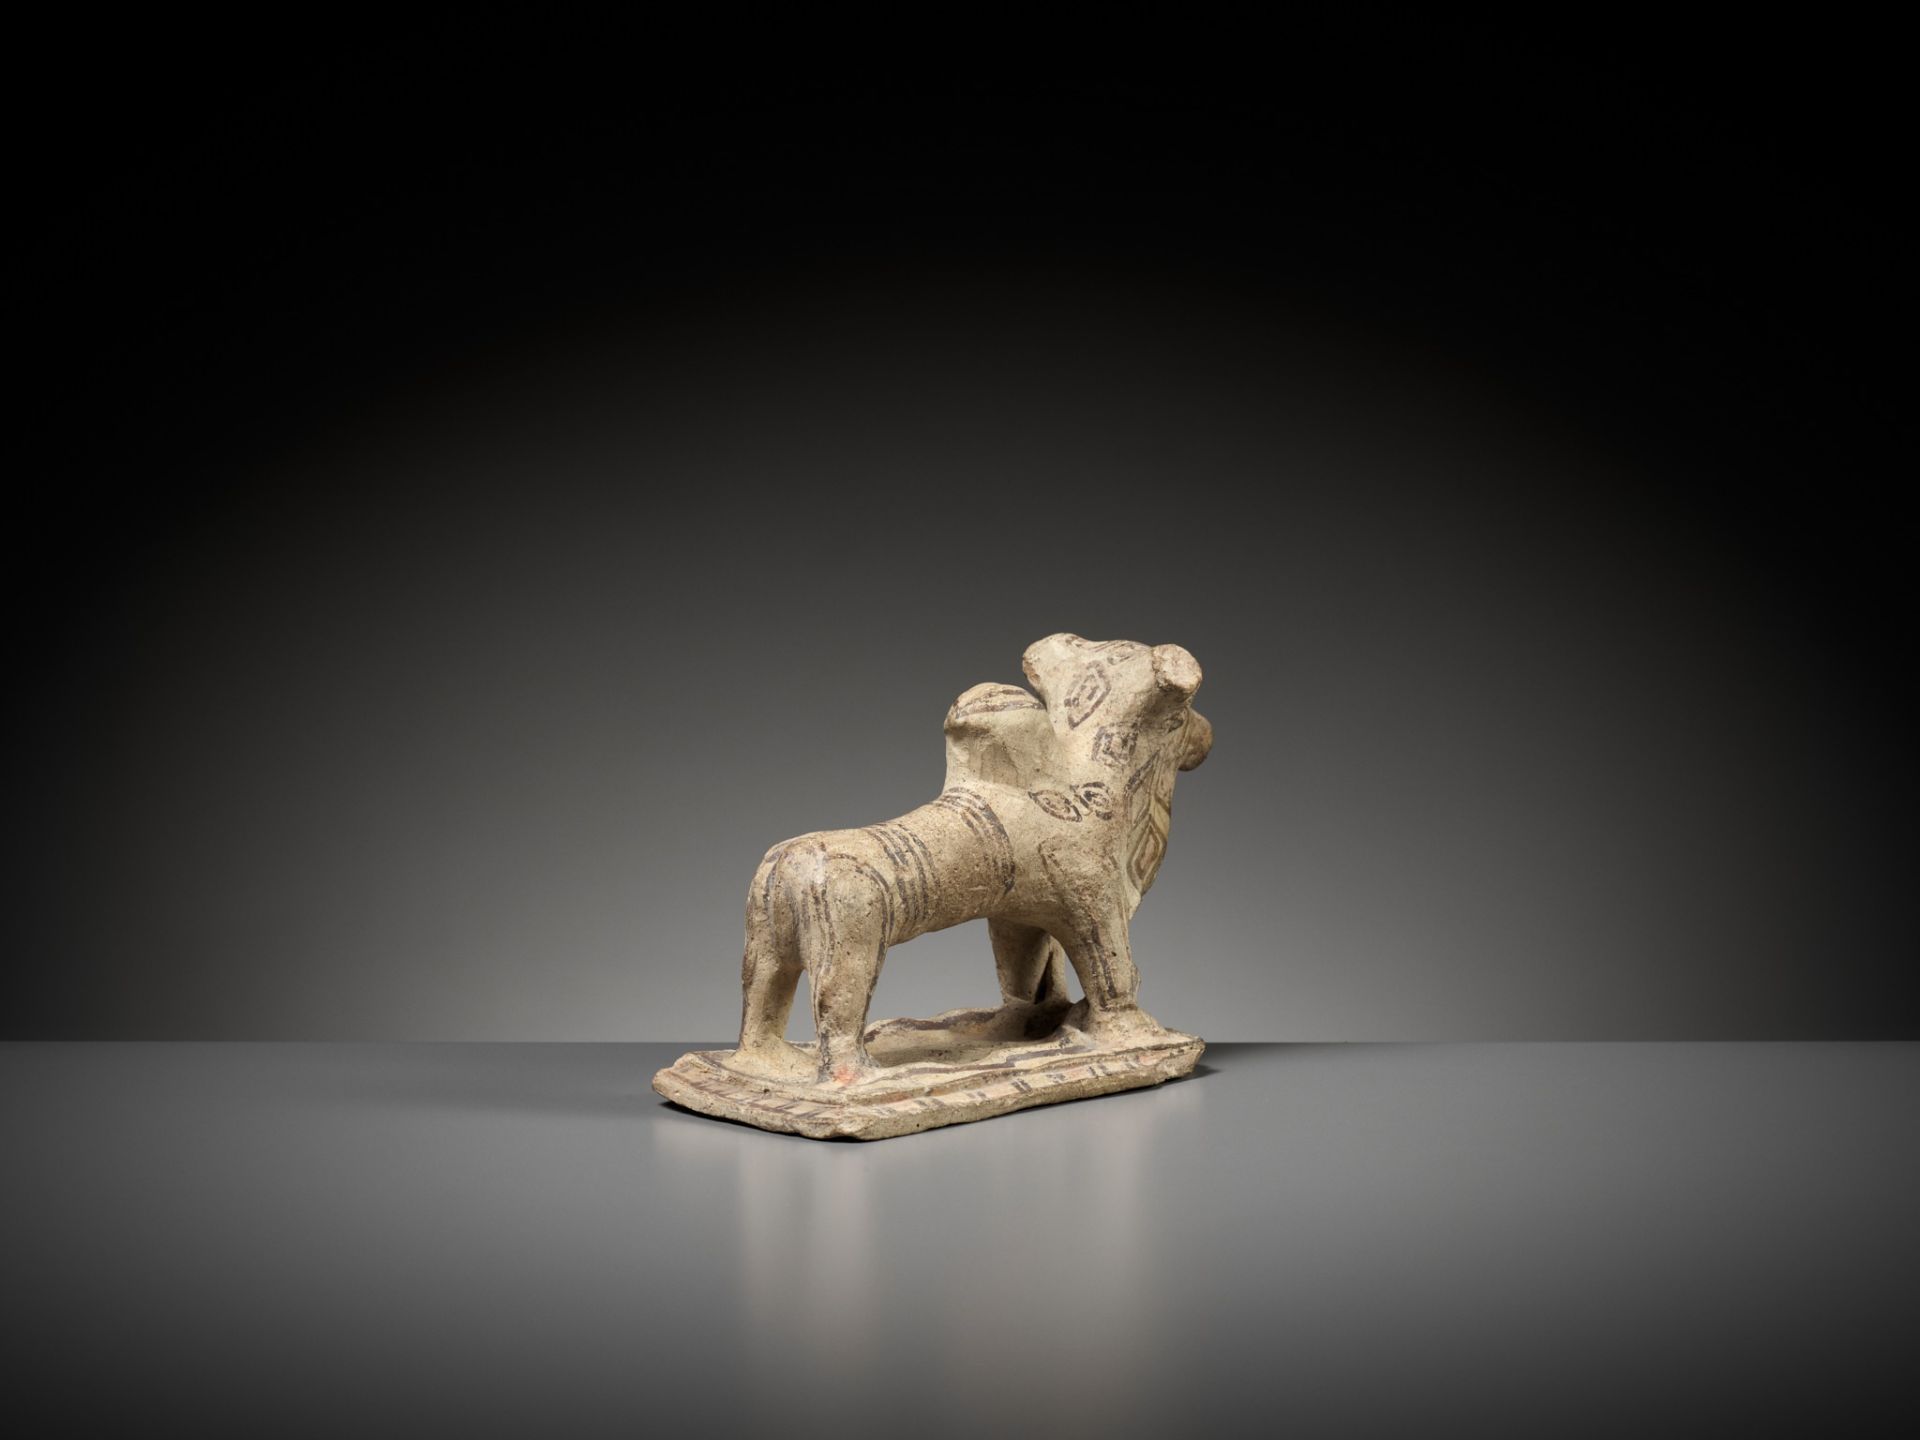 A PAINTED TERRACOTTA FIGURE OF A HUMPED OX, MOHENJO-DARO - Image 10 of 12